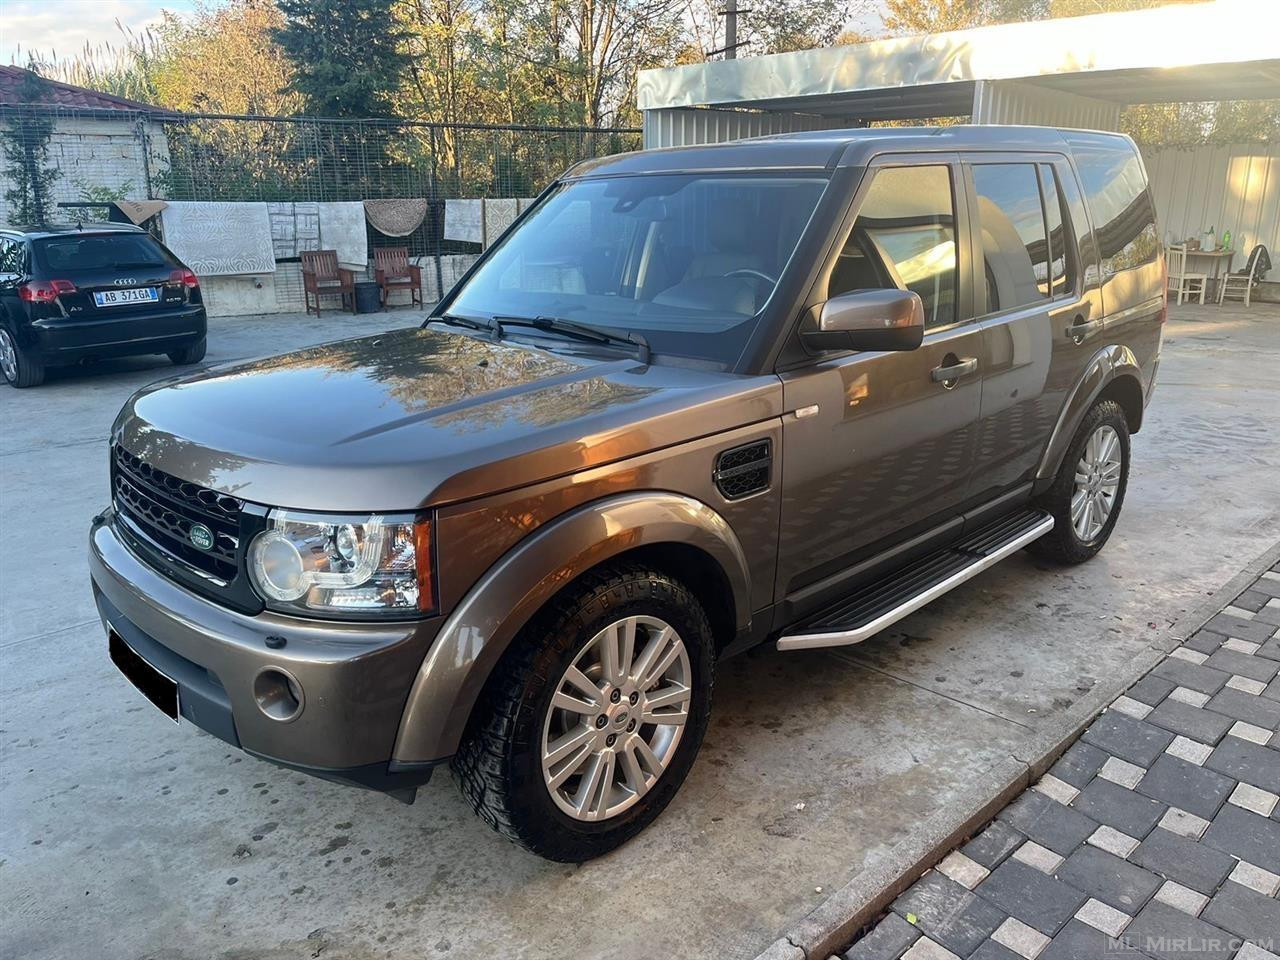 ❗️SHITET LAND ROVER DISCOVERY 4 2012 3.0 Nafte❗️